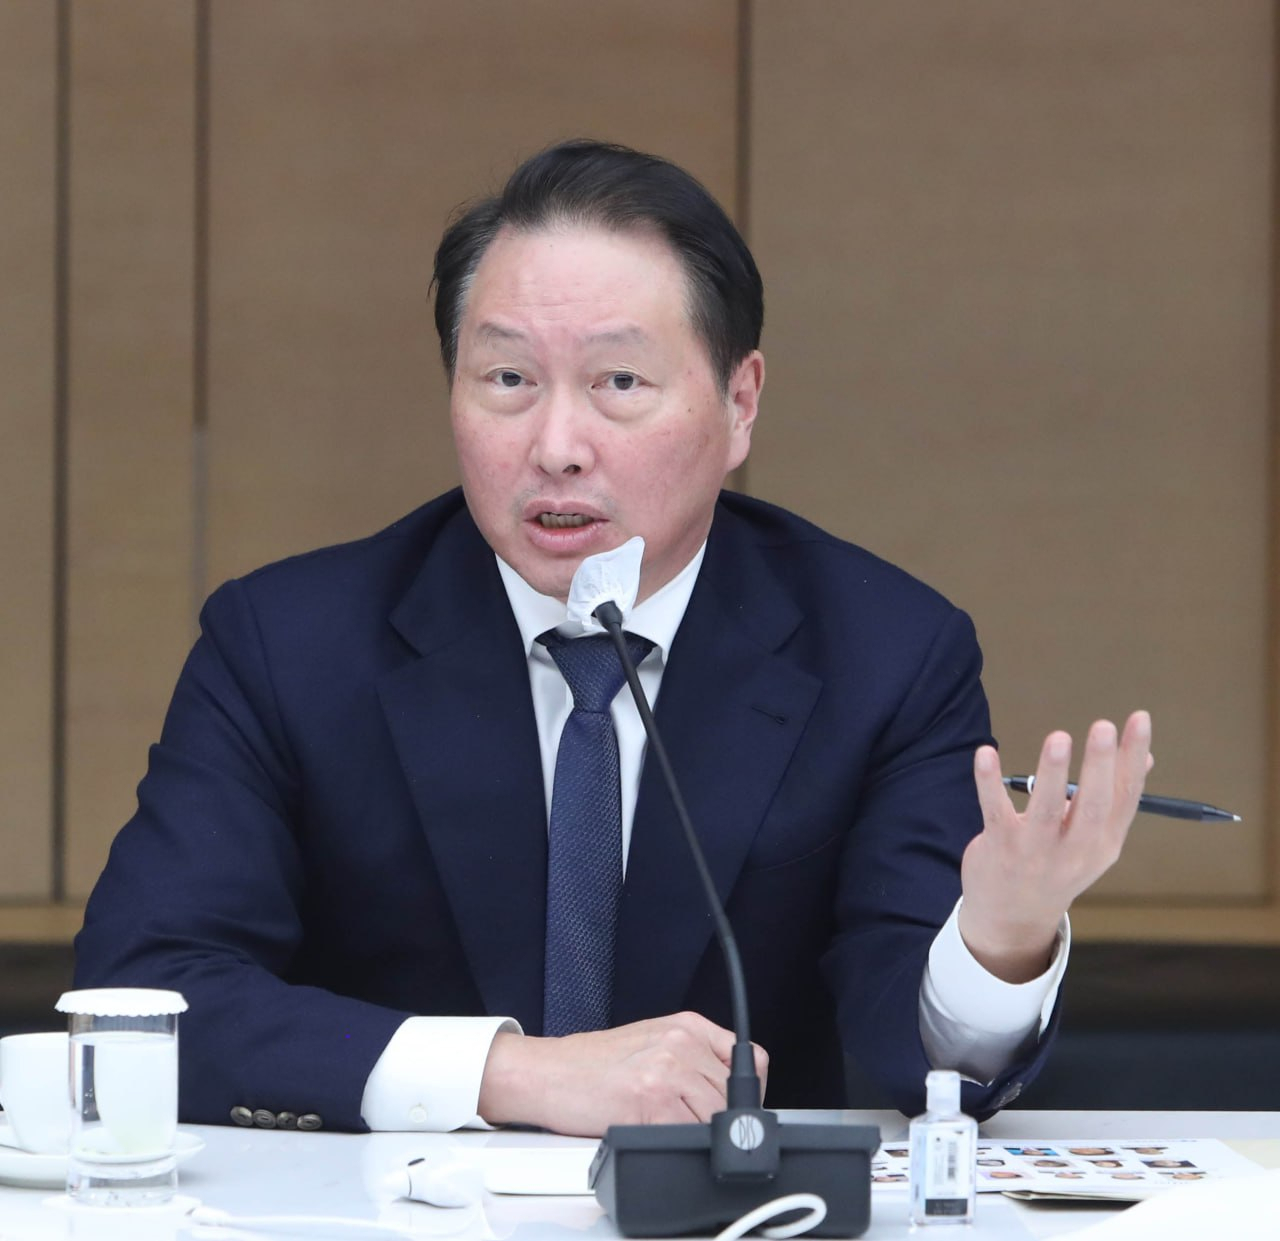 SK Group Chairman Chey Tae-won, who doubles as chairman of the Korea Chamber of Commerce and Industry, speaks at a year-end press conference at the KCCI headquarters in central Seoul, Monday. (KCCI)